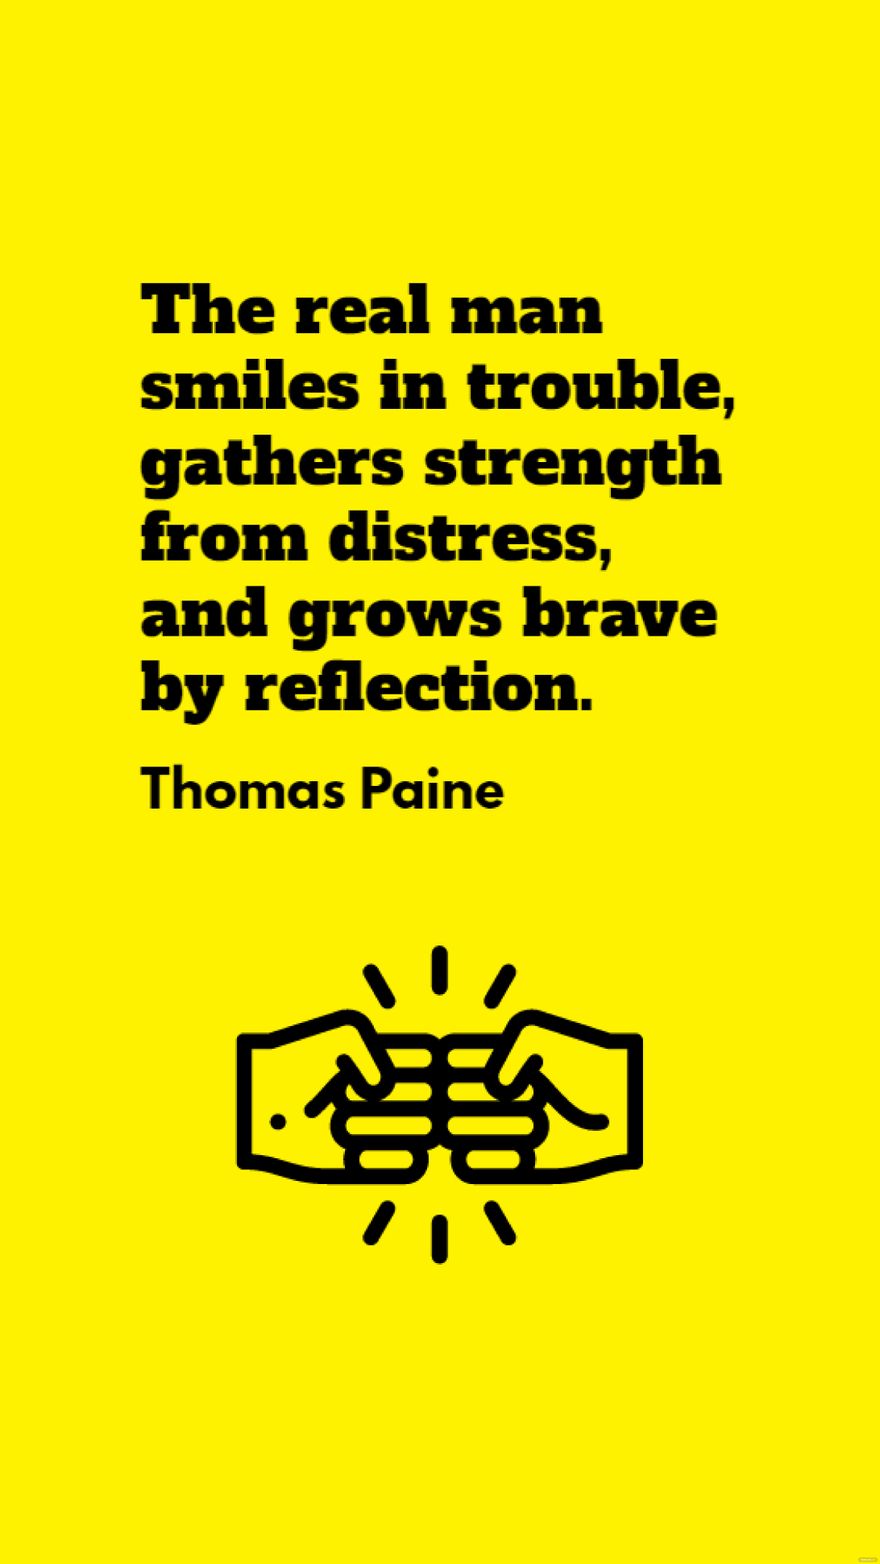 Thomas Paine - The real man smiles in trouble, gathers strength from distress, and grows brave by reflection.